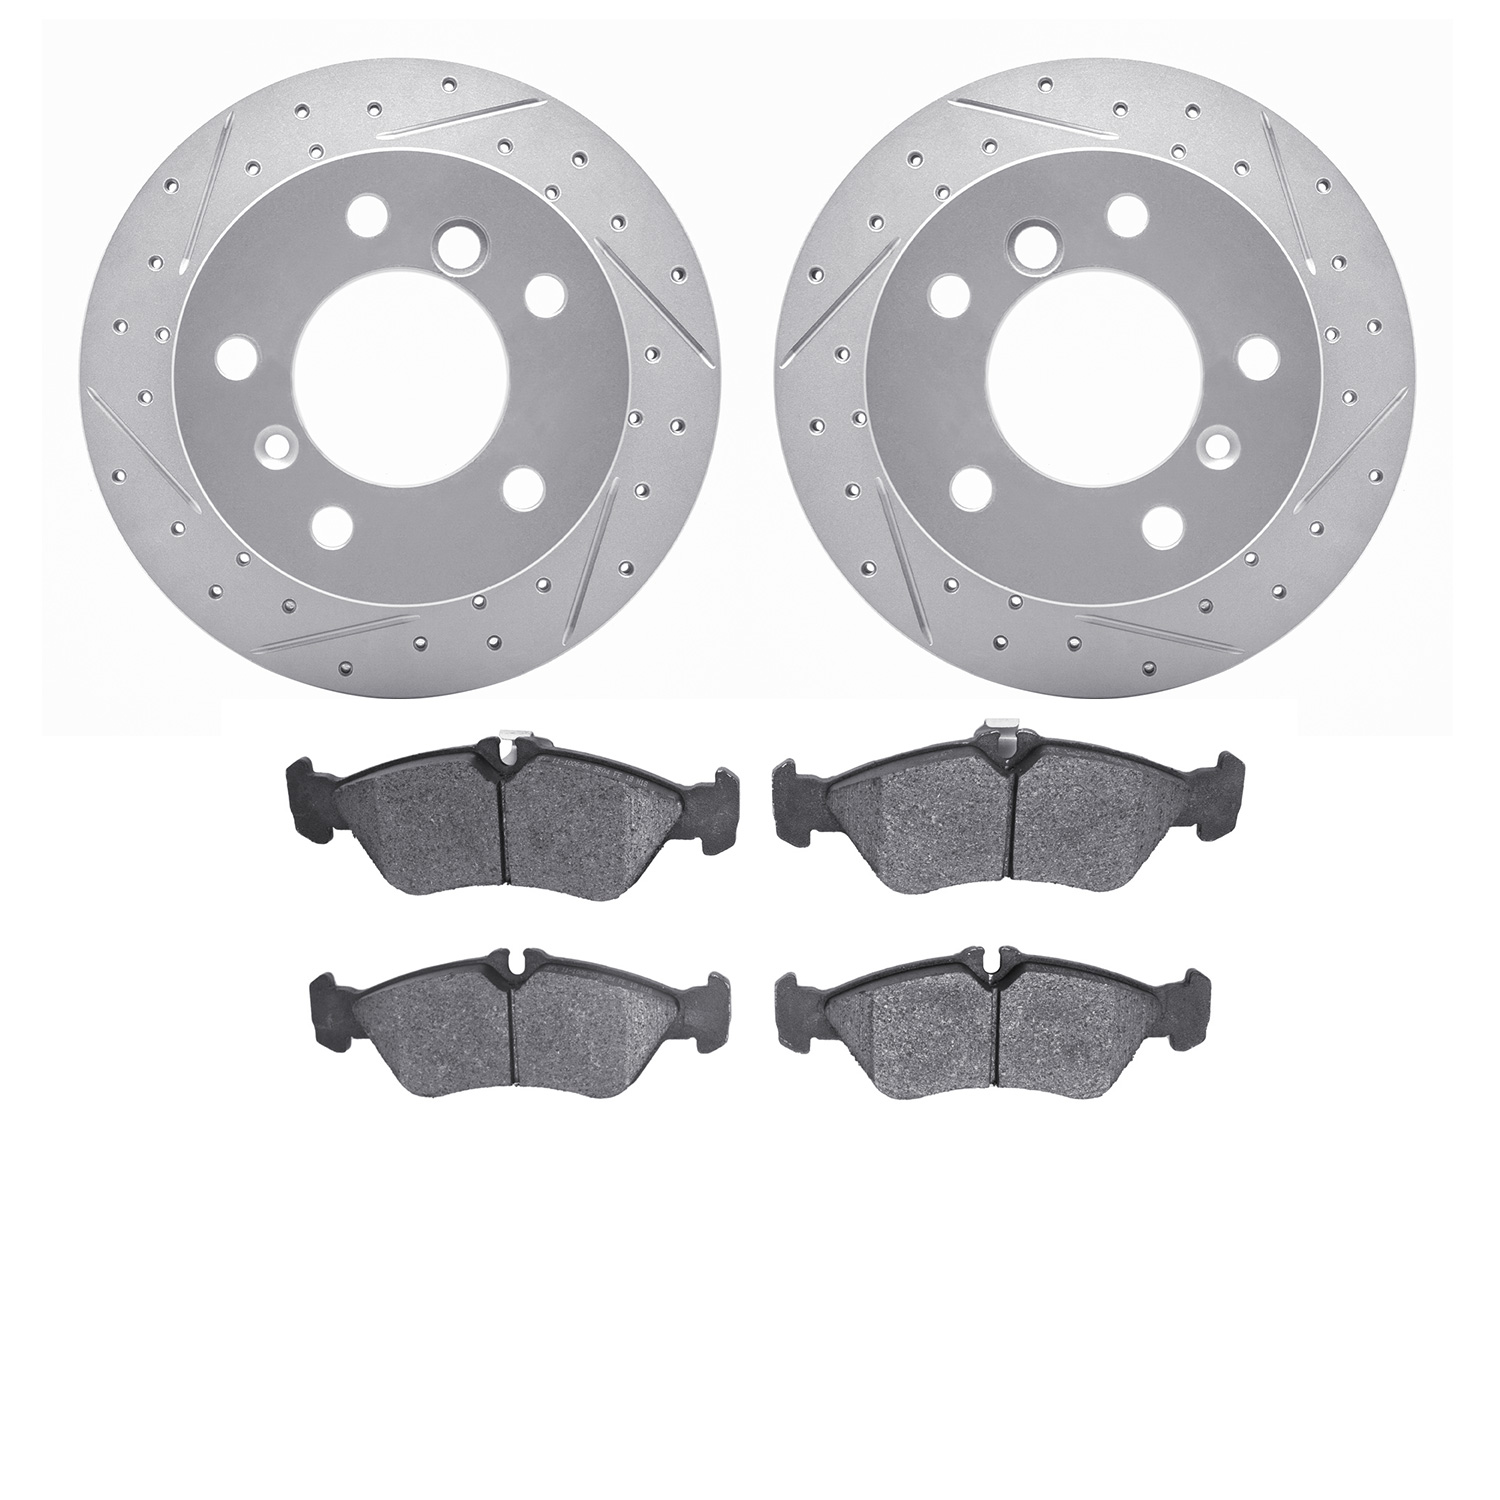 2502-40016 Geoperformance Drilled/Slotted Rotors w/5000 Advanced Brake Pads Kit, 2002-2006 Multiple Makes/Models, Position: Rear